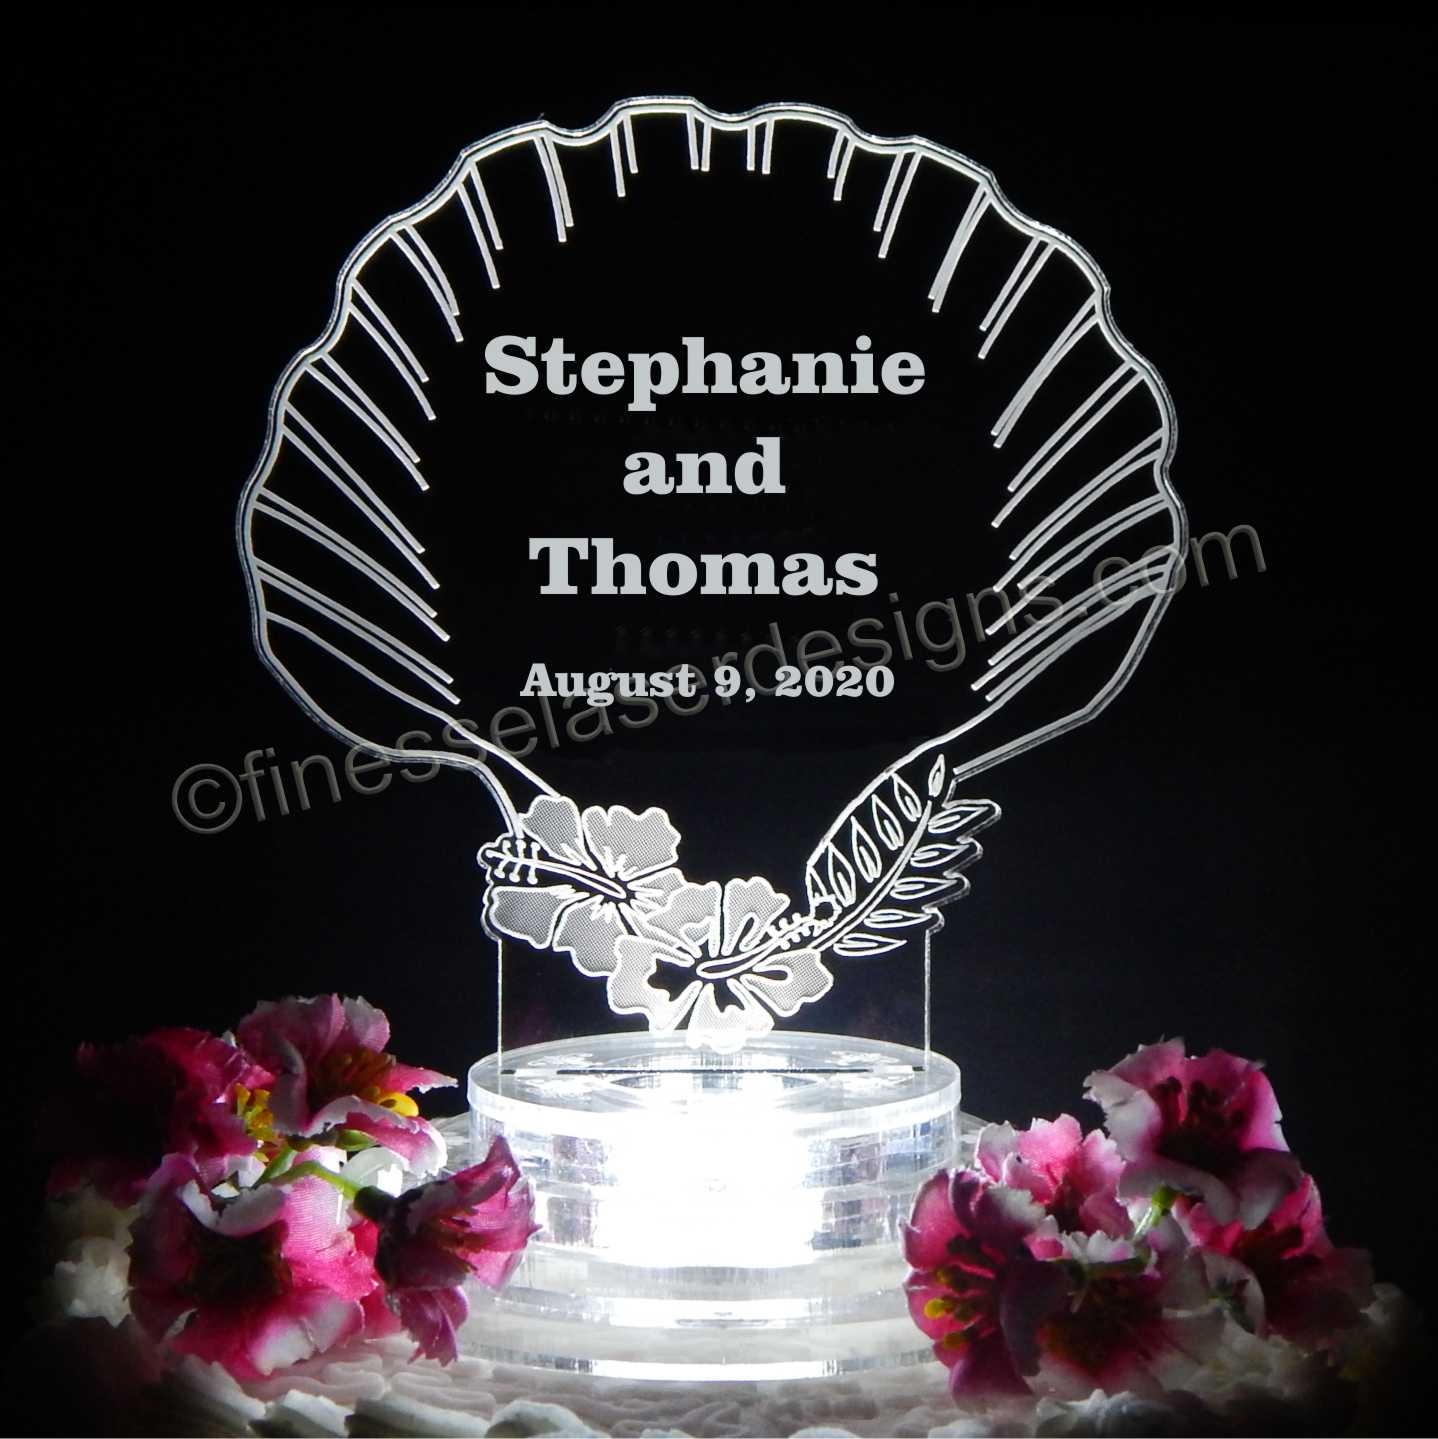 Clear acrylic seashell shaped cake topper lighted up with a white light and engraved with names and date